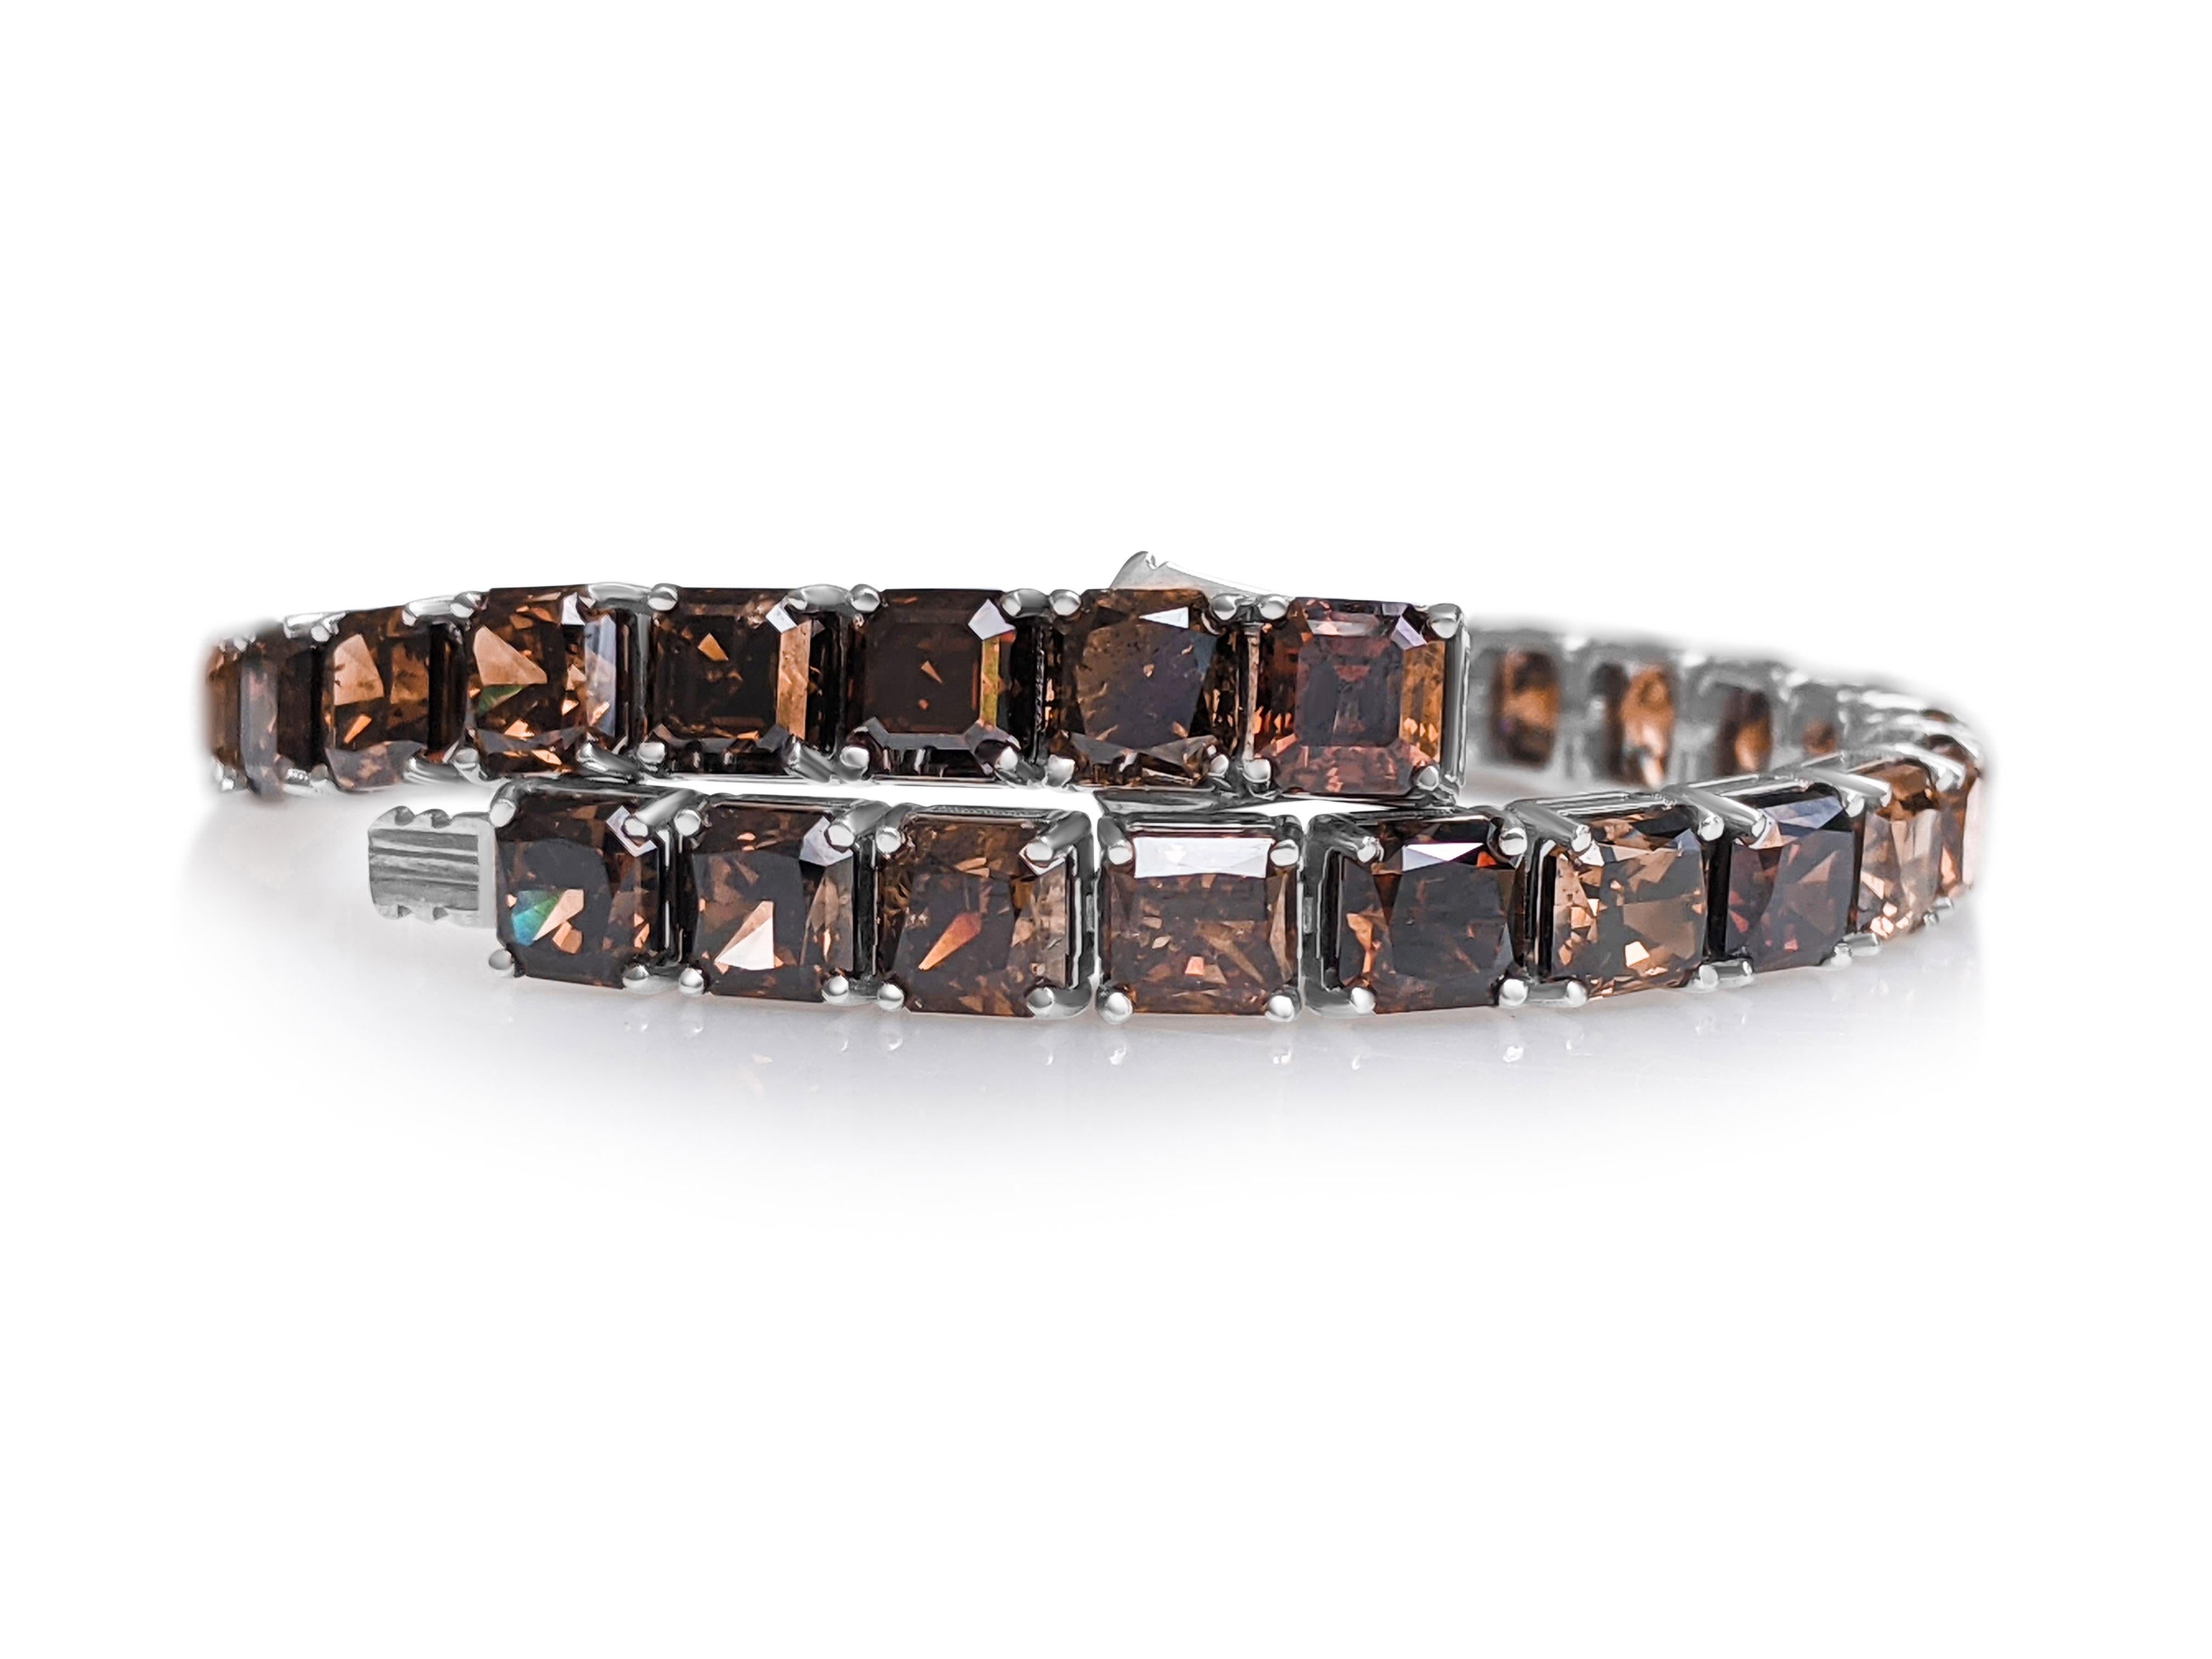 ** In Hong Kong and the USA the VAT is 0%.

A truly unique masterpiece, this fancy color diamond bracelet is made with square cut diamonds of 1ct each!
The diamonds are set in a Riviera style bracelet that will draw attention whenever you go. 
Don't